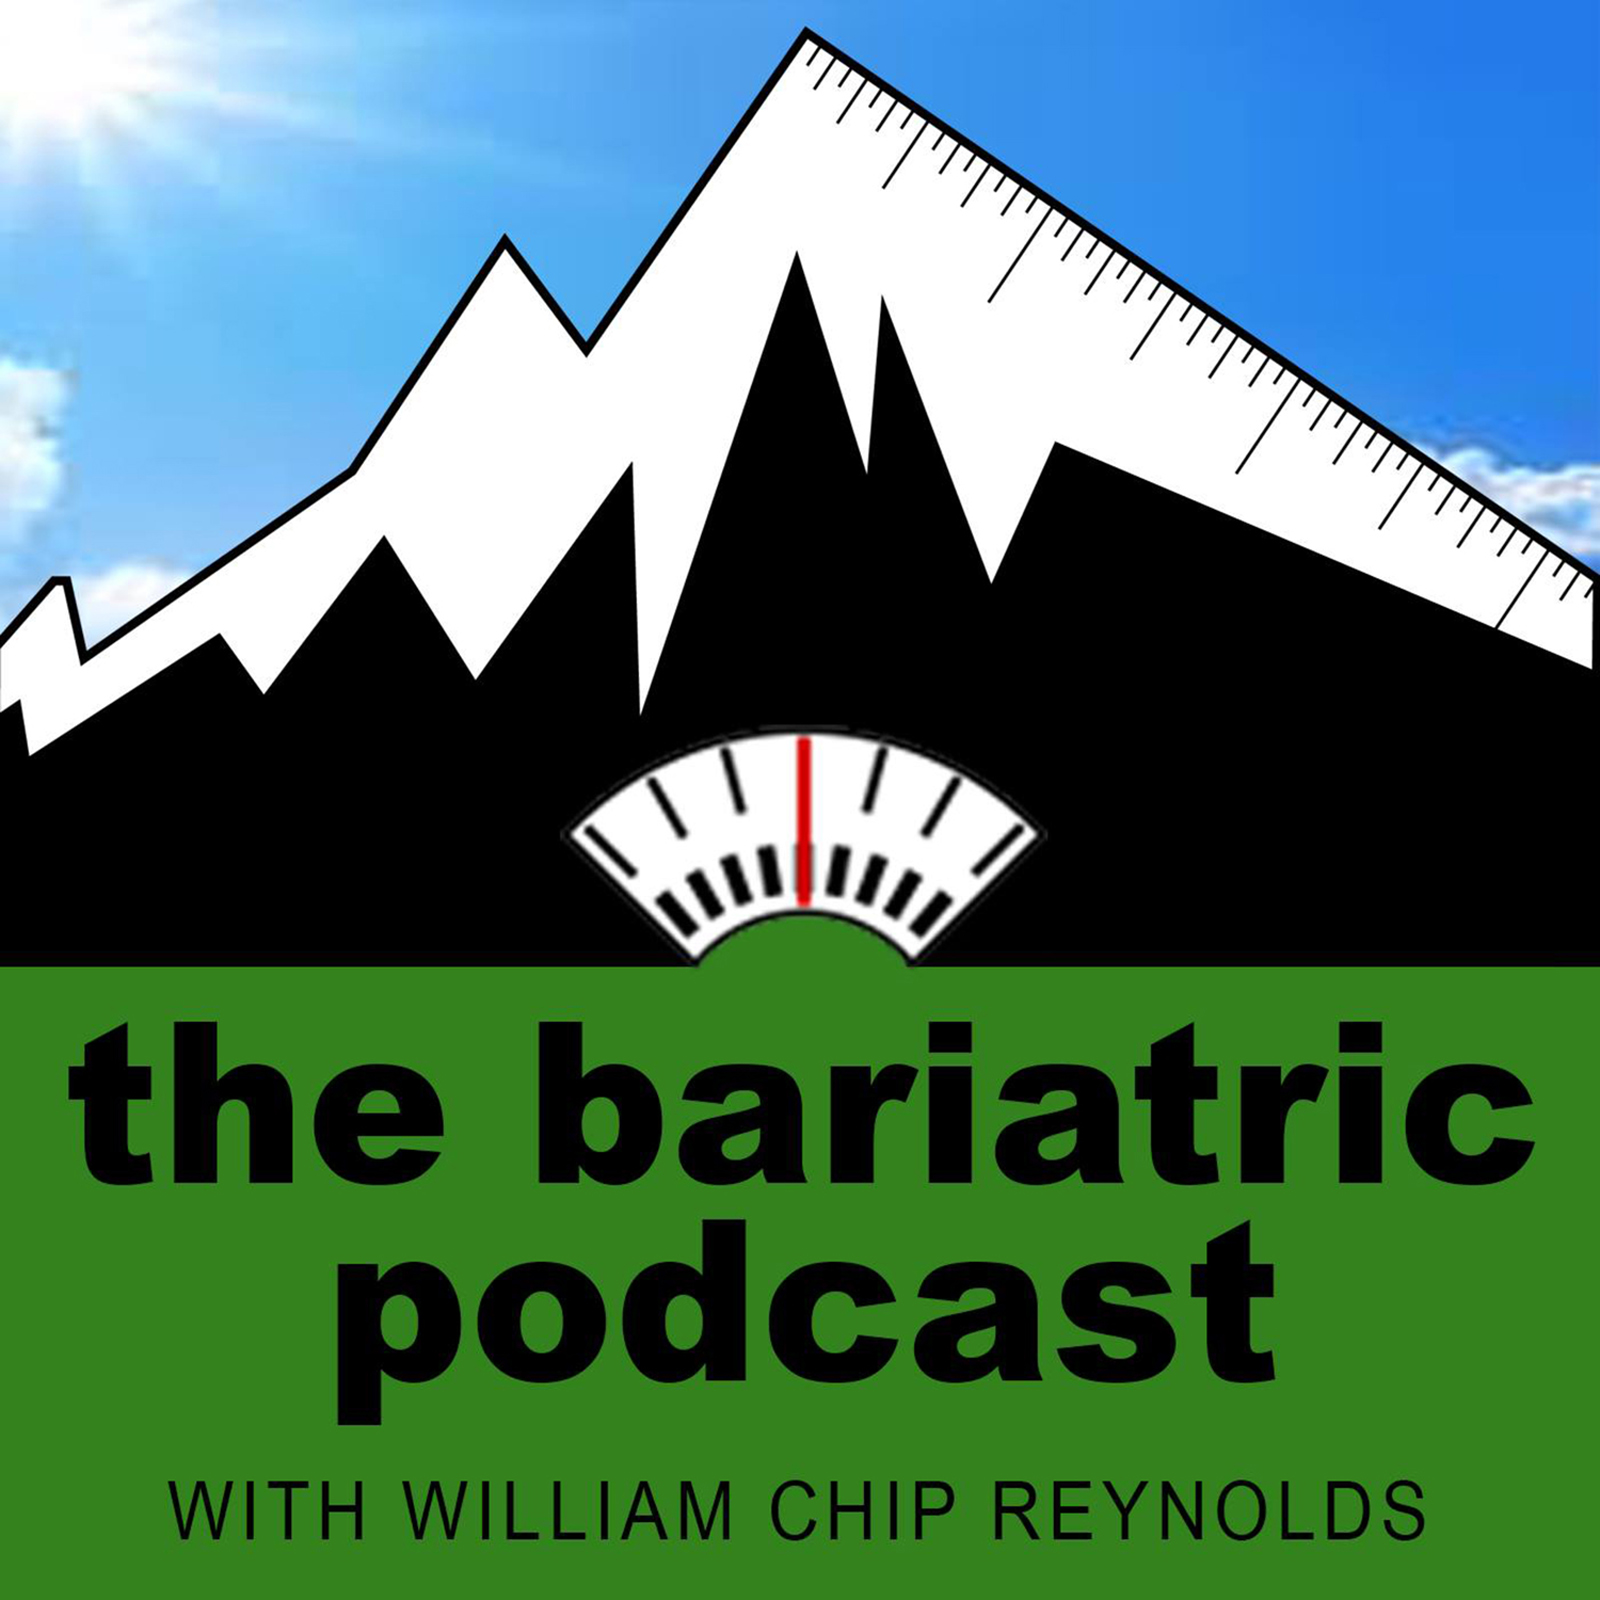 The Bariatric Podcast Episode Five